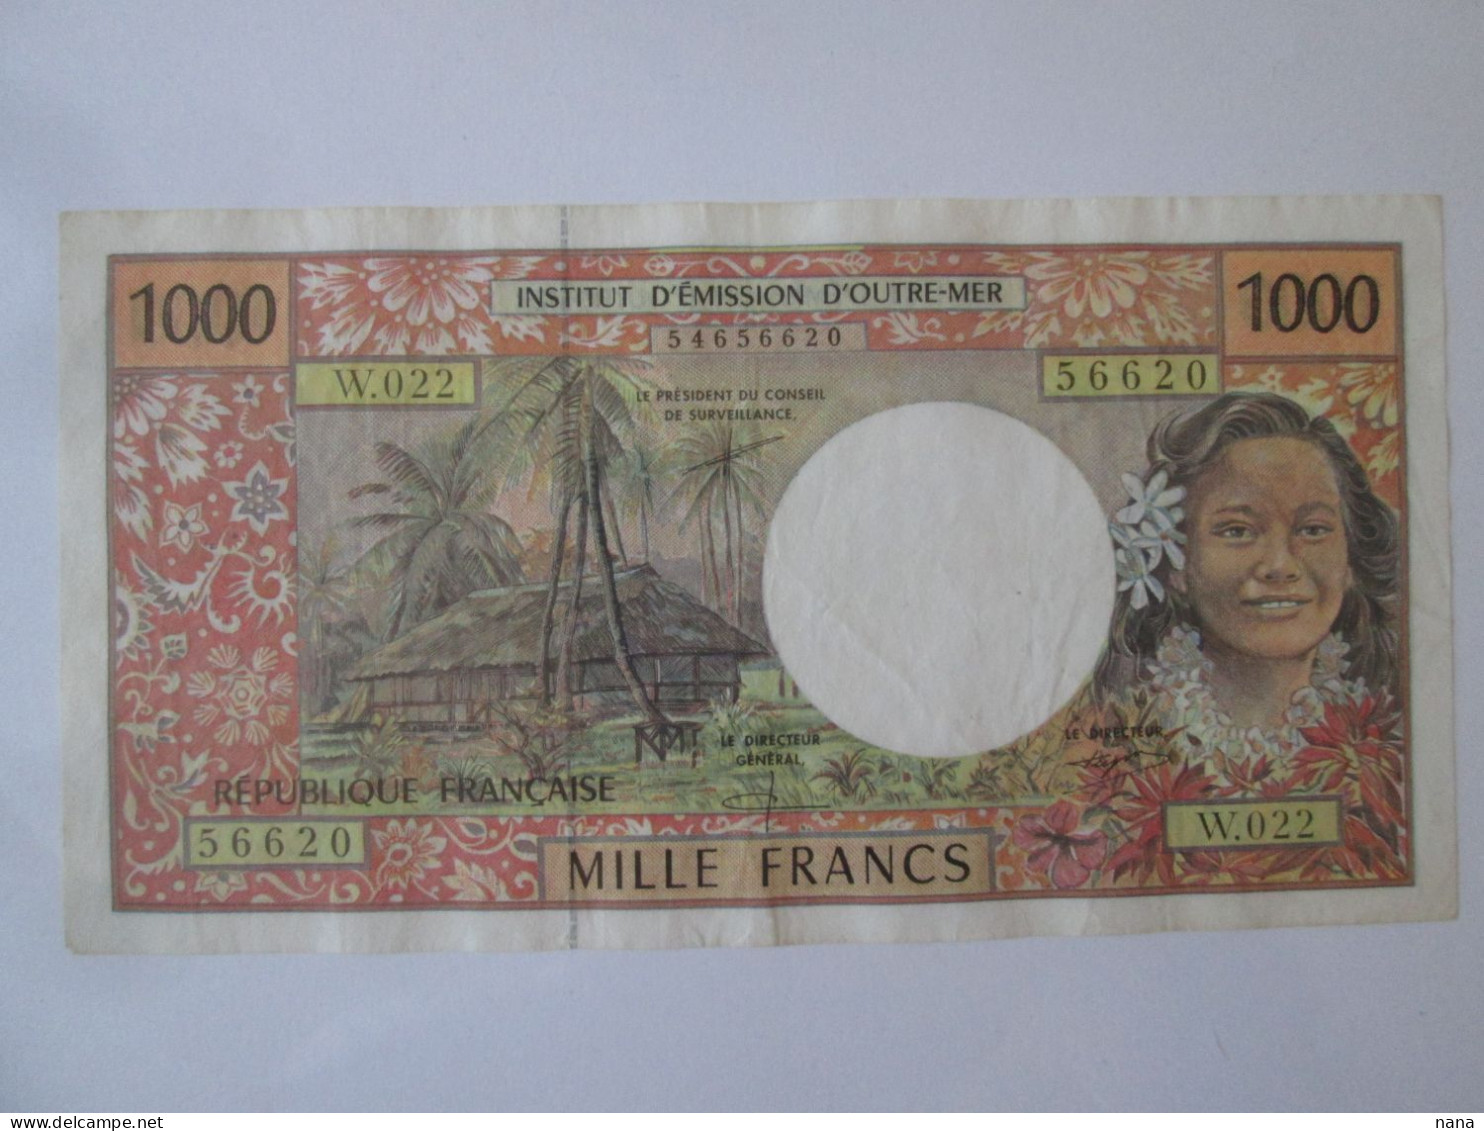 French Polynesia(Tahiti) 1000 Francs 1996 Banknote,see Pictures - Papeete (Polynésie Française 1914-1985)